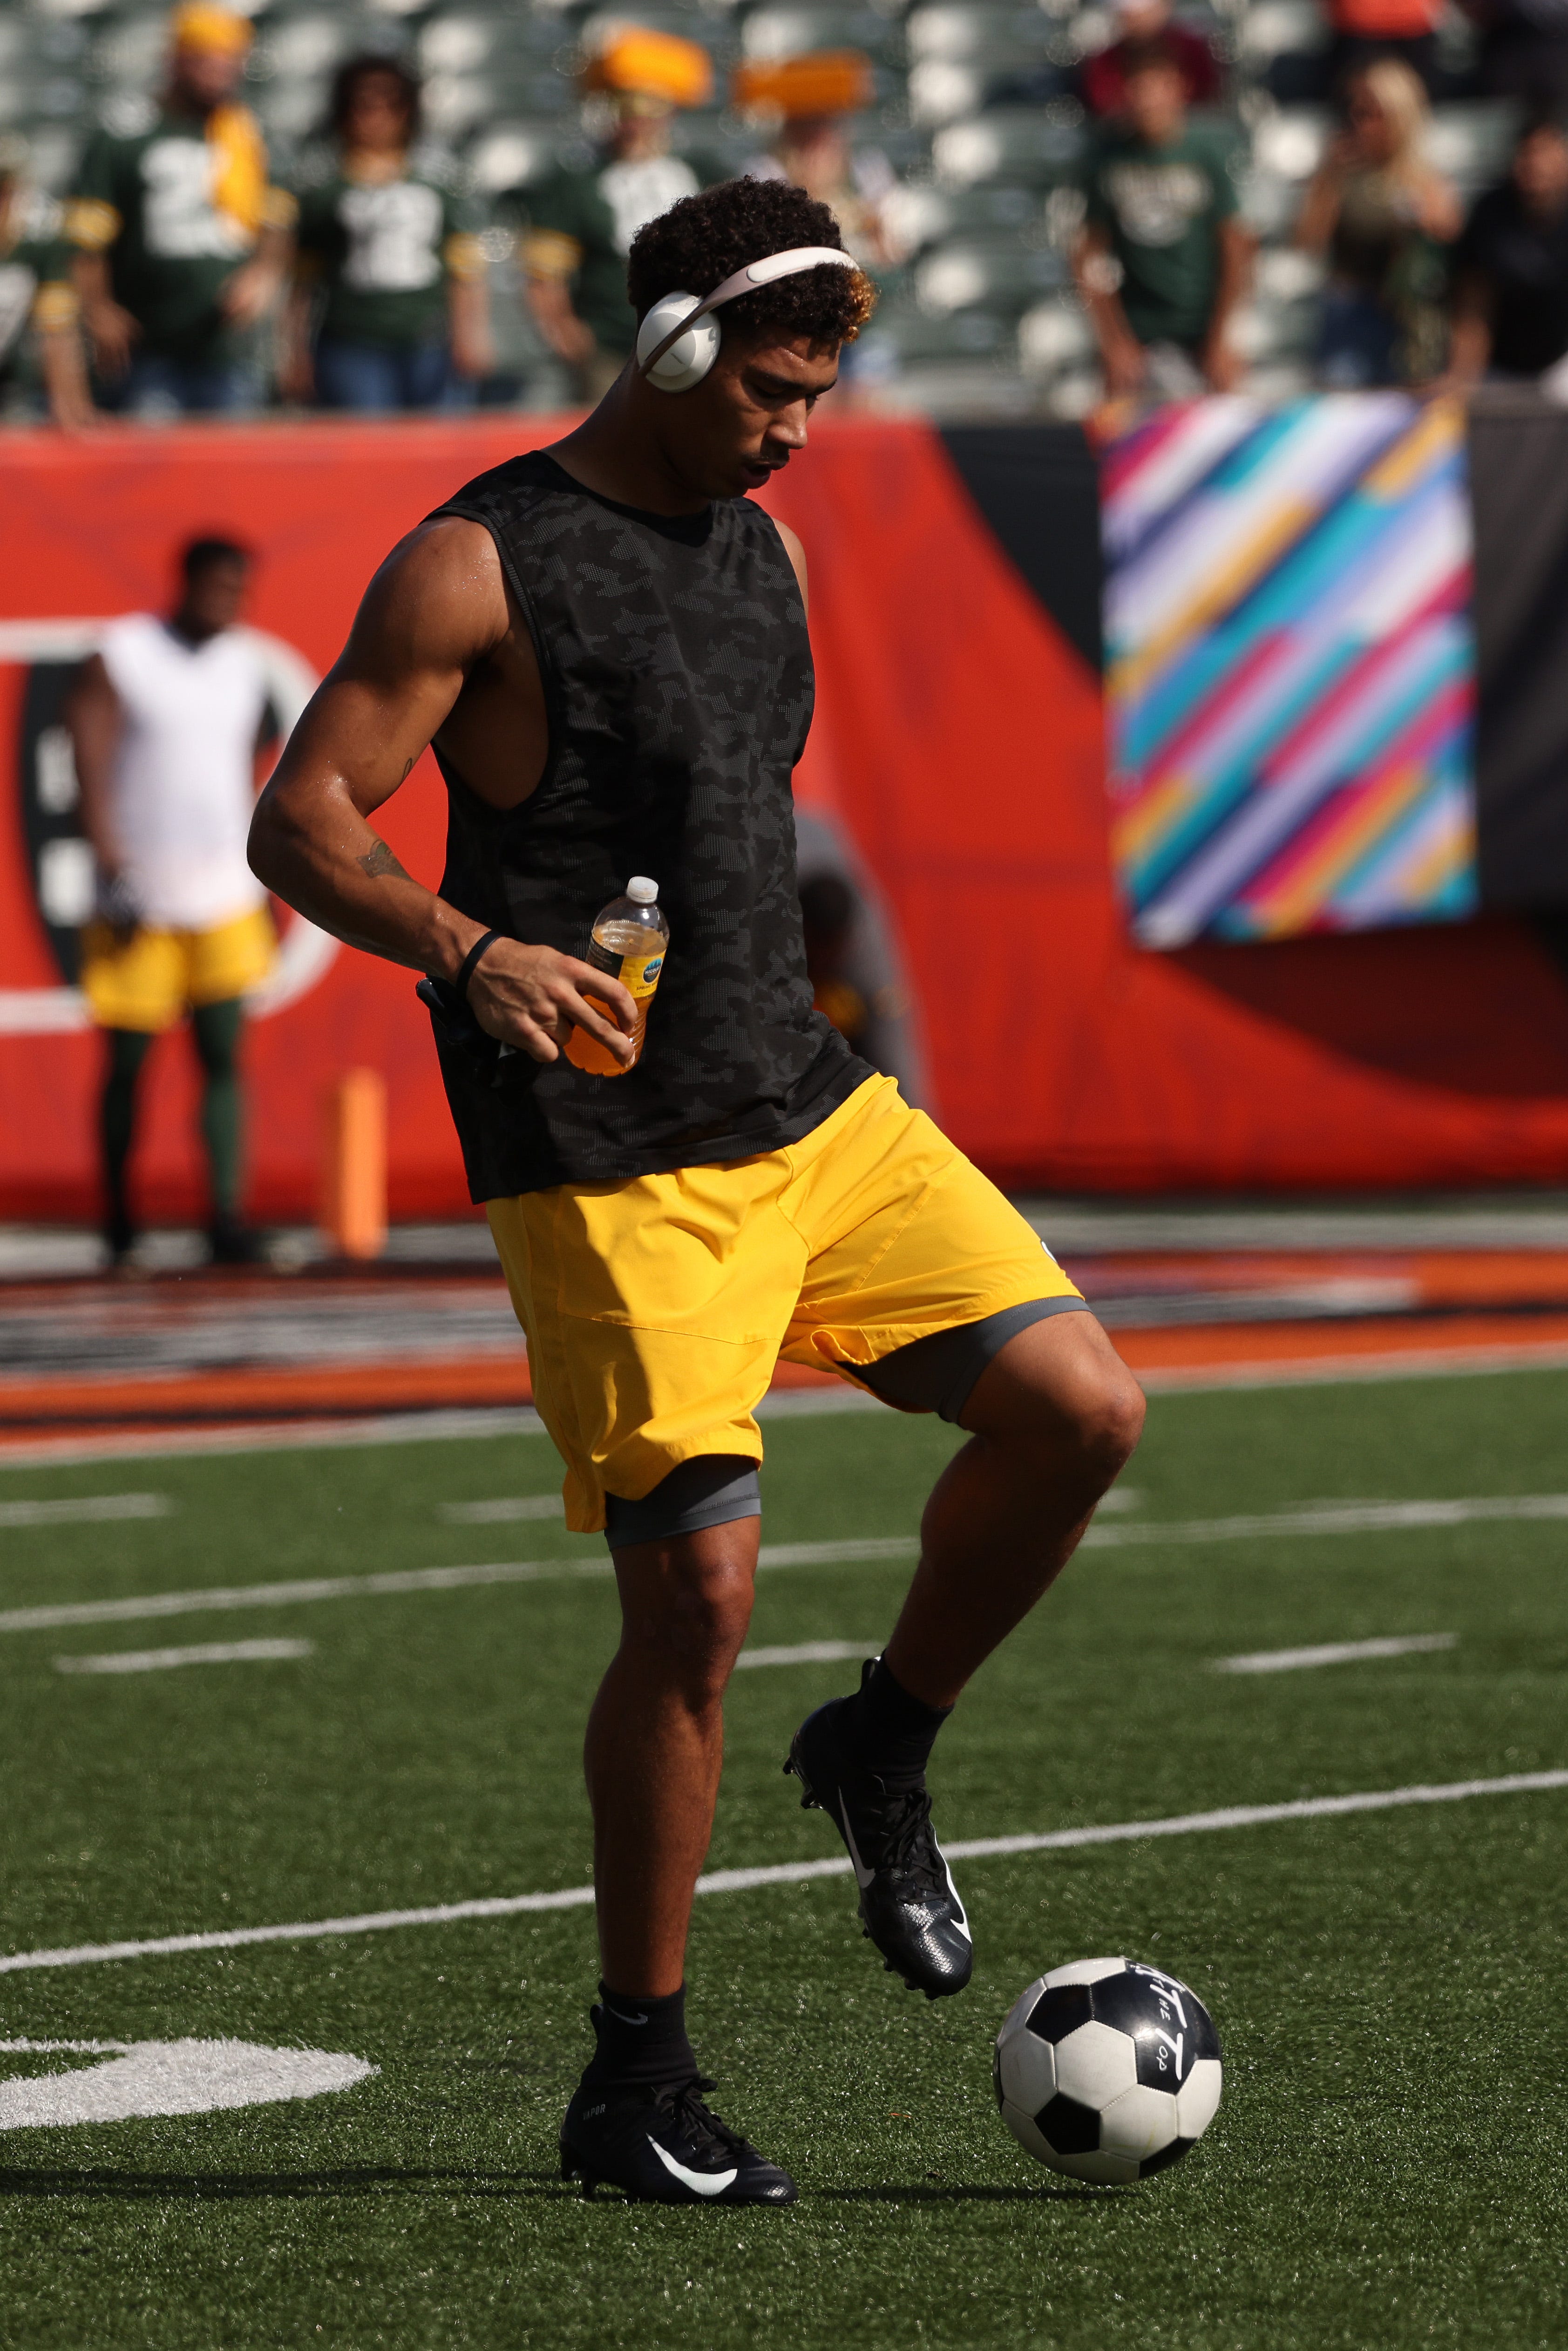 Green Bay Packers wide receiver Allen Lazard kicks a soccer ball on the field before the game against the Cincinnati Bengals on Oct. 10, 2021, at Paul Brown Stadium in Cincinnati.